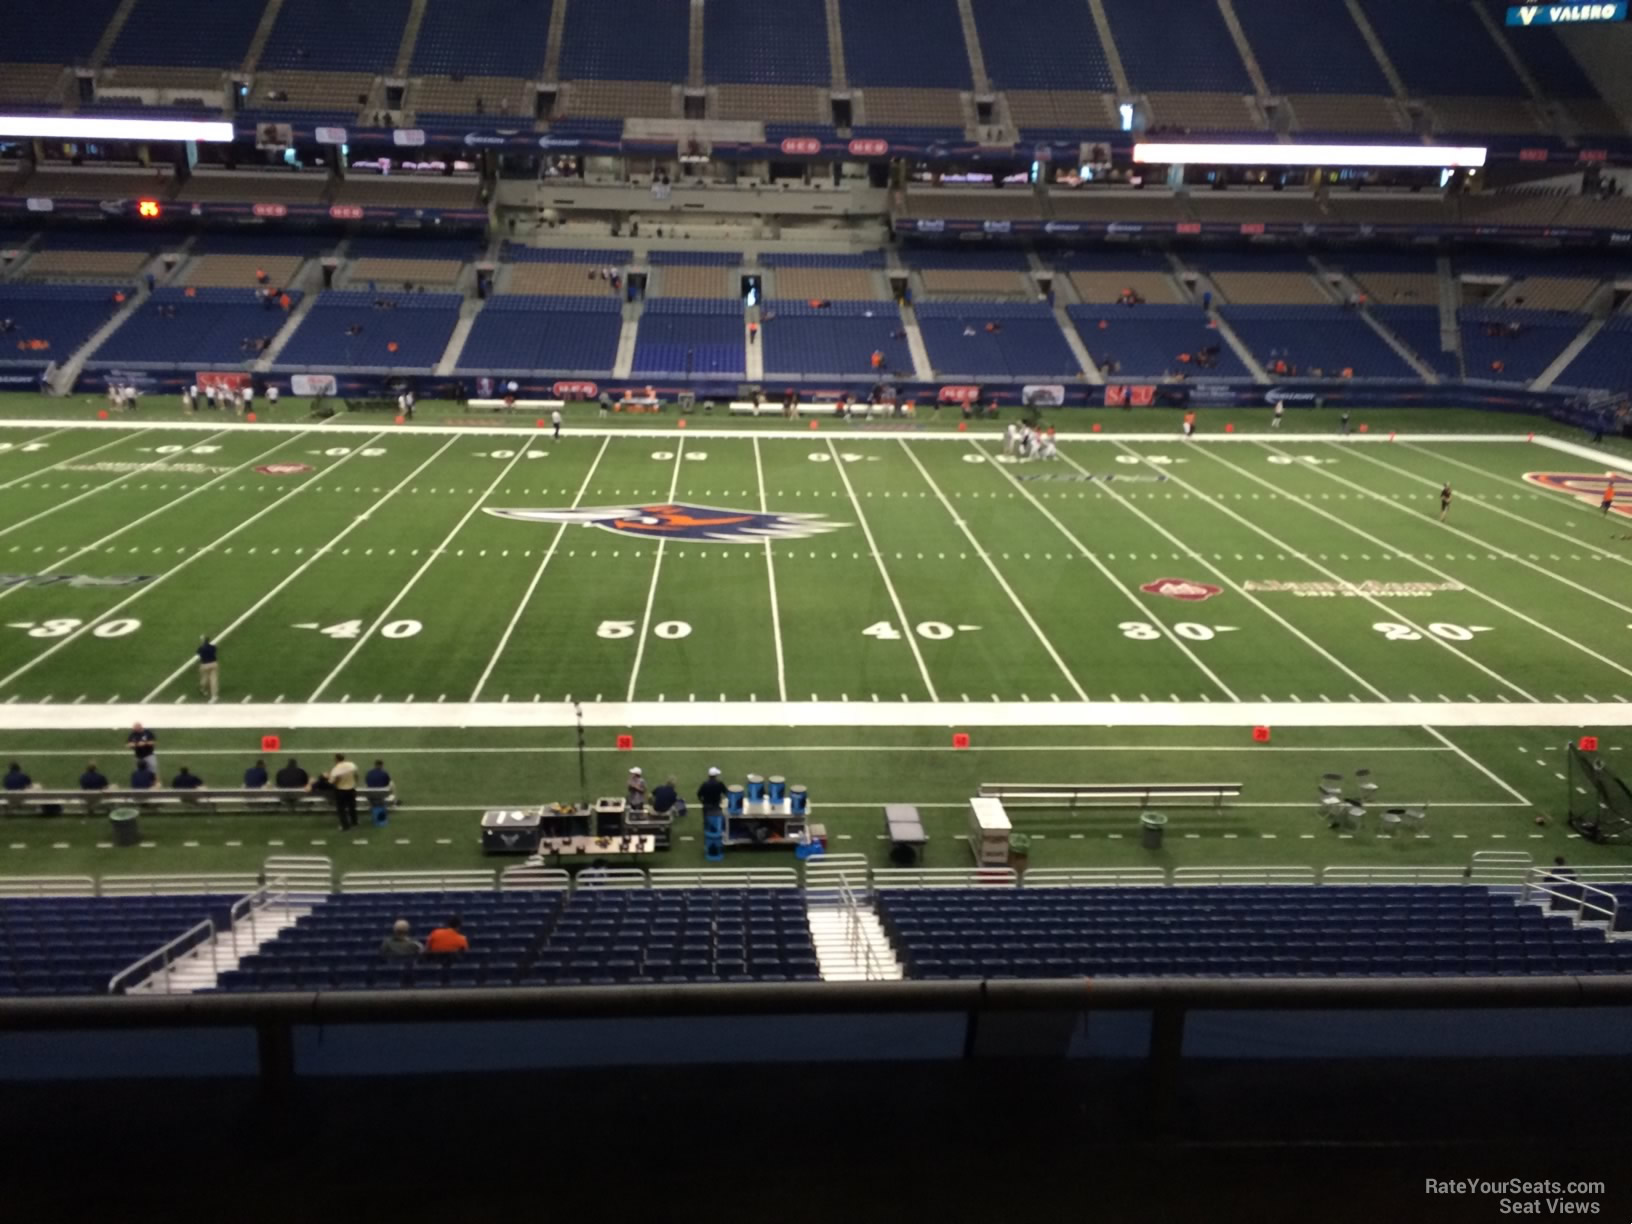 section 234, row 5 seat view  for football - alamodome